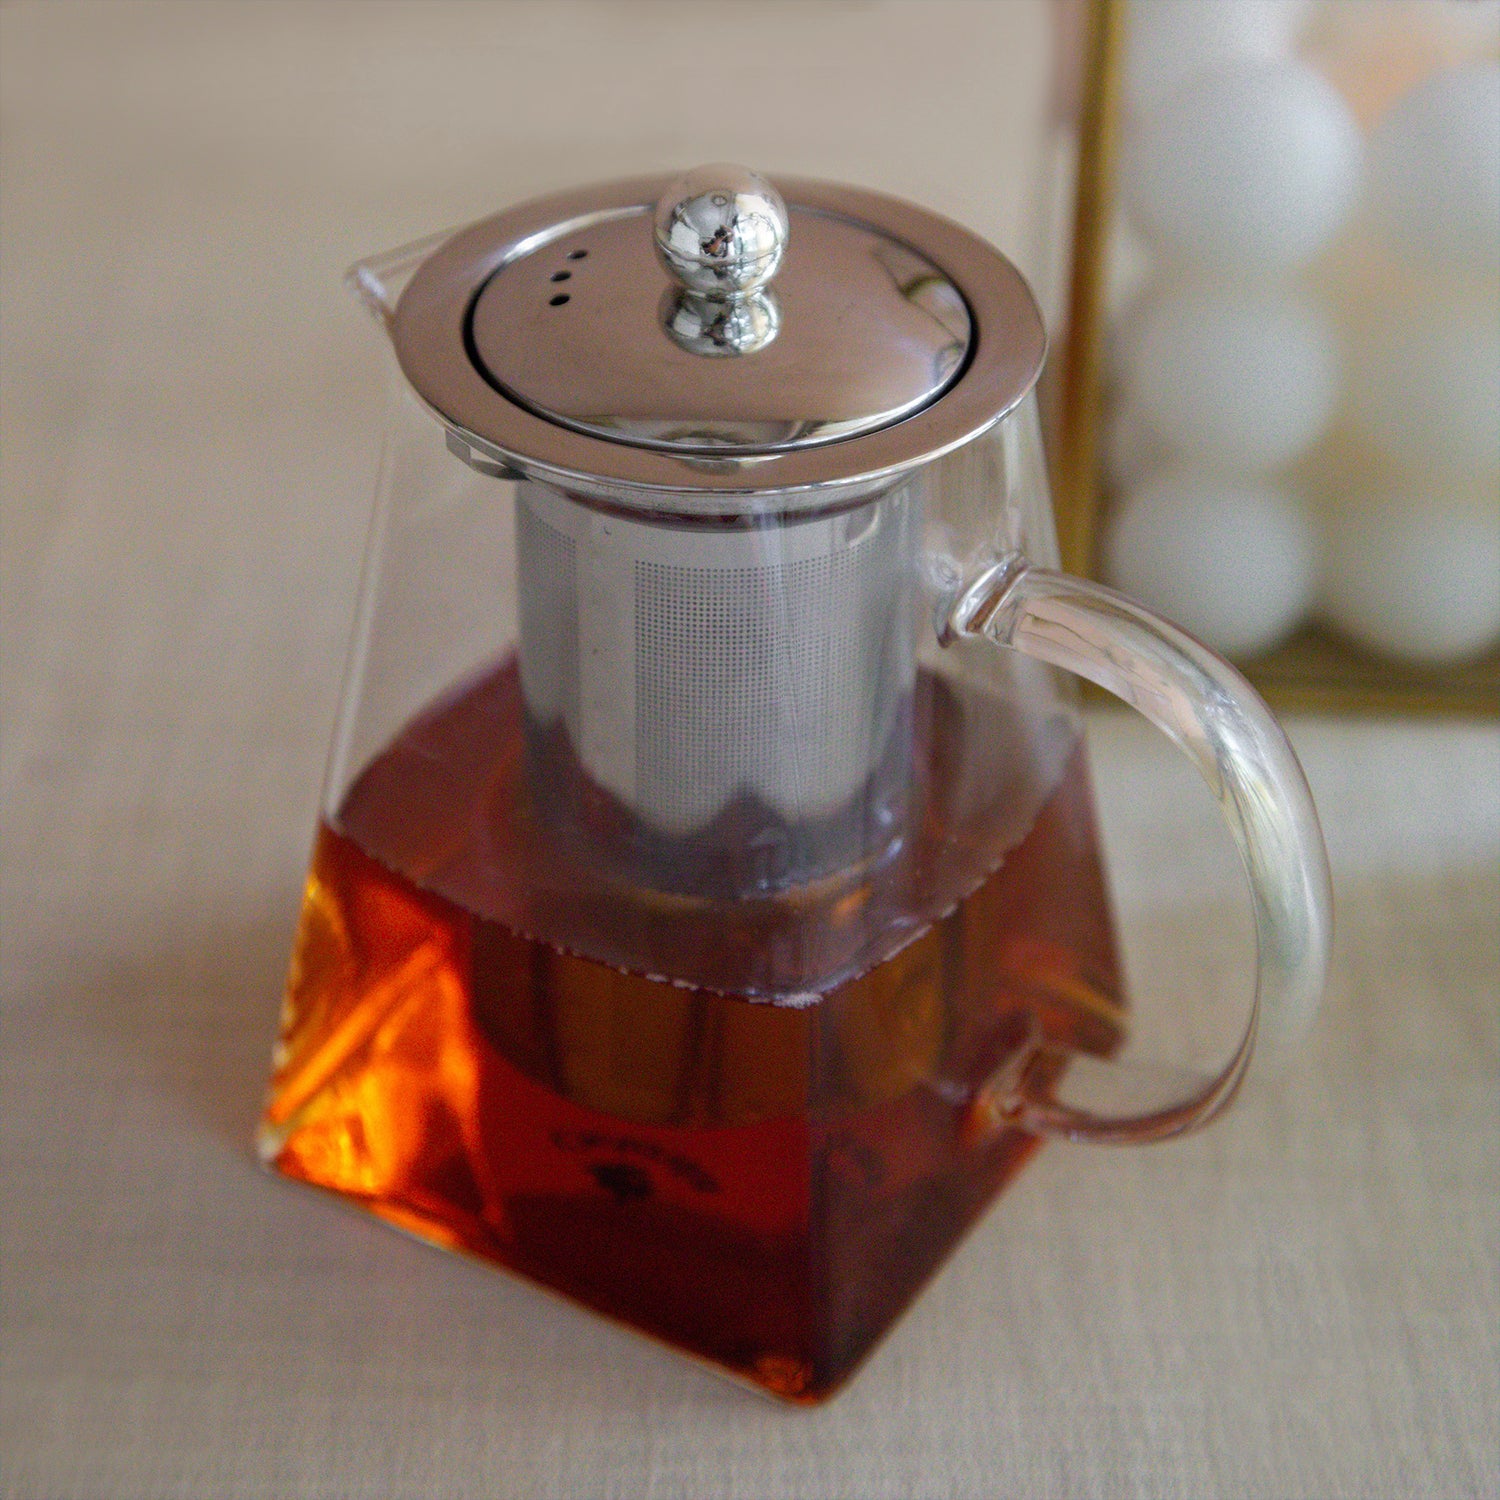 Pyramid Shaped Borosilicate Glass Kettle With Steel Infuser - 500ml